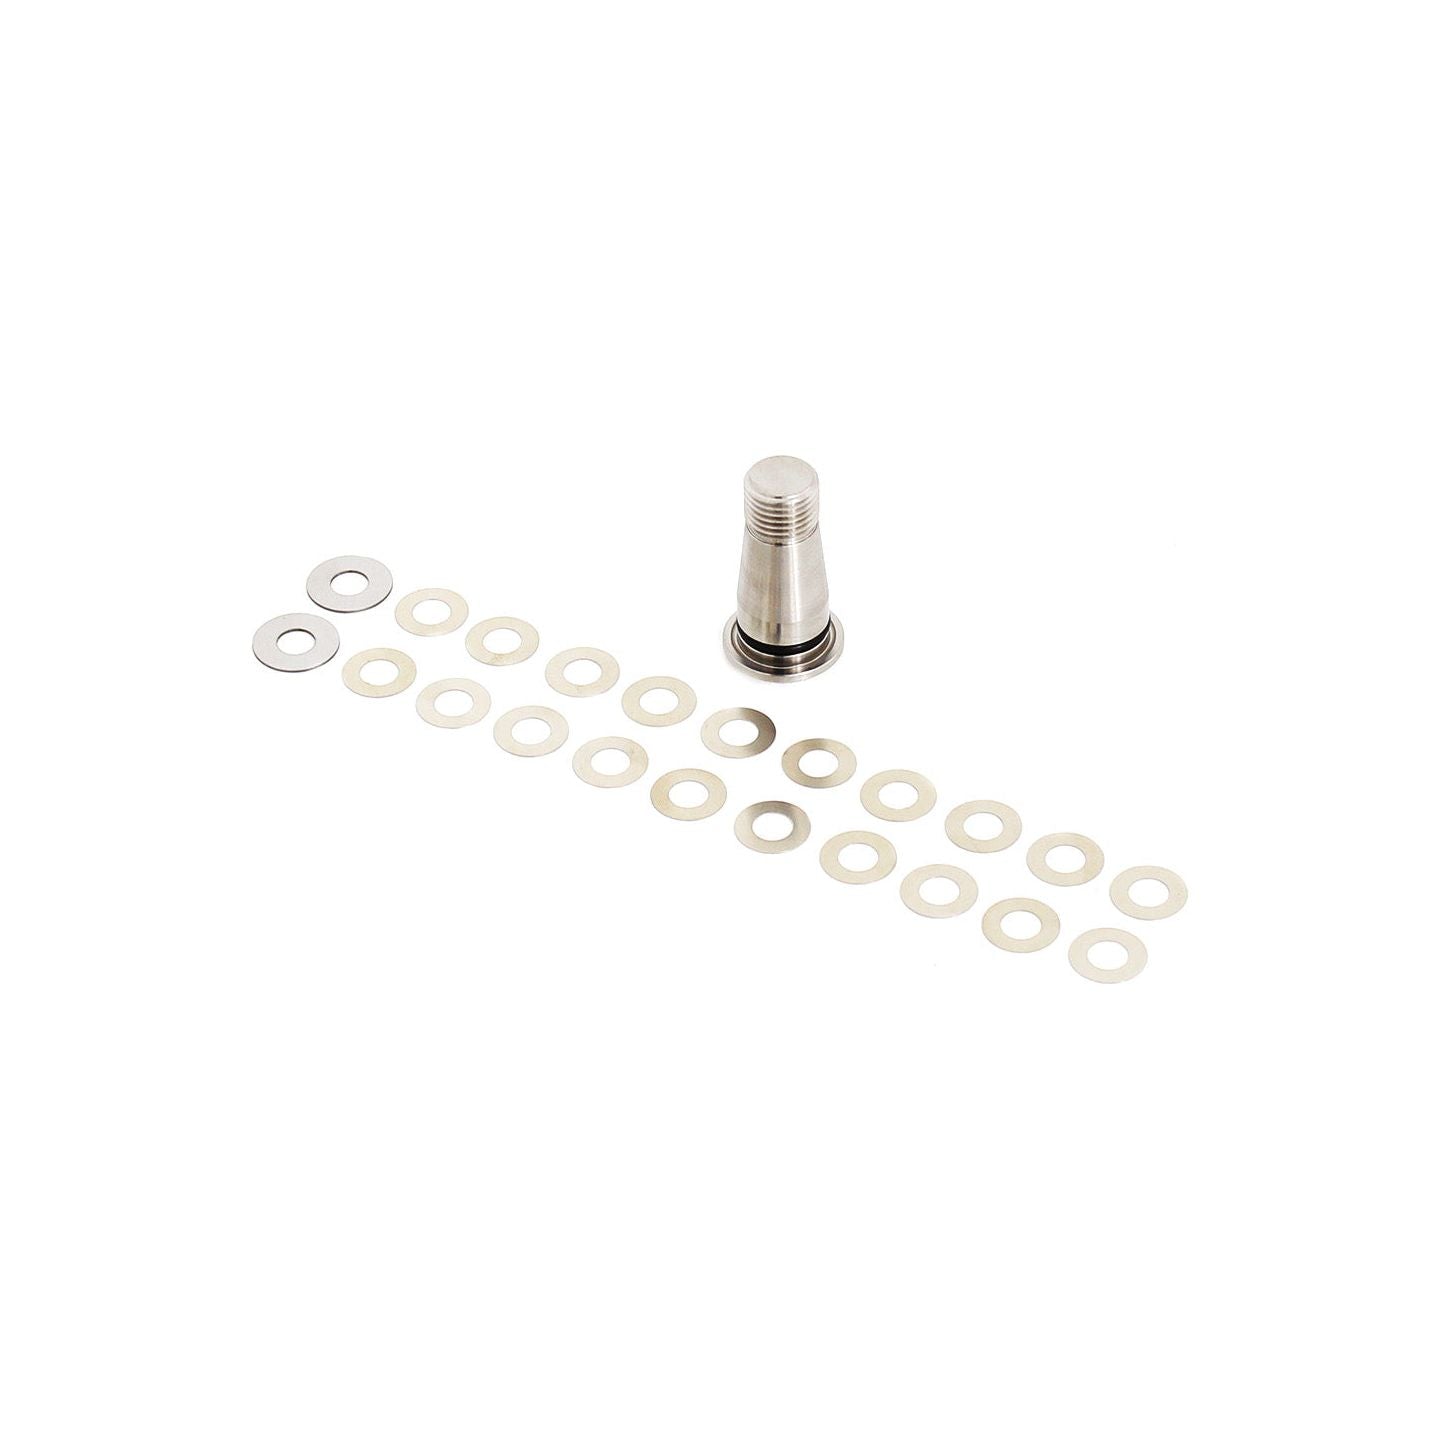 Spare Titanium Pin and Shims for Q02K